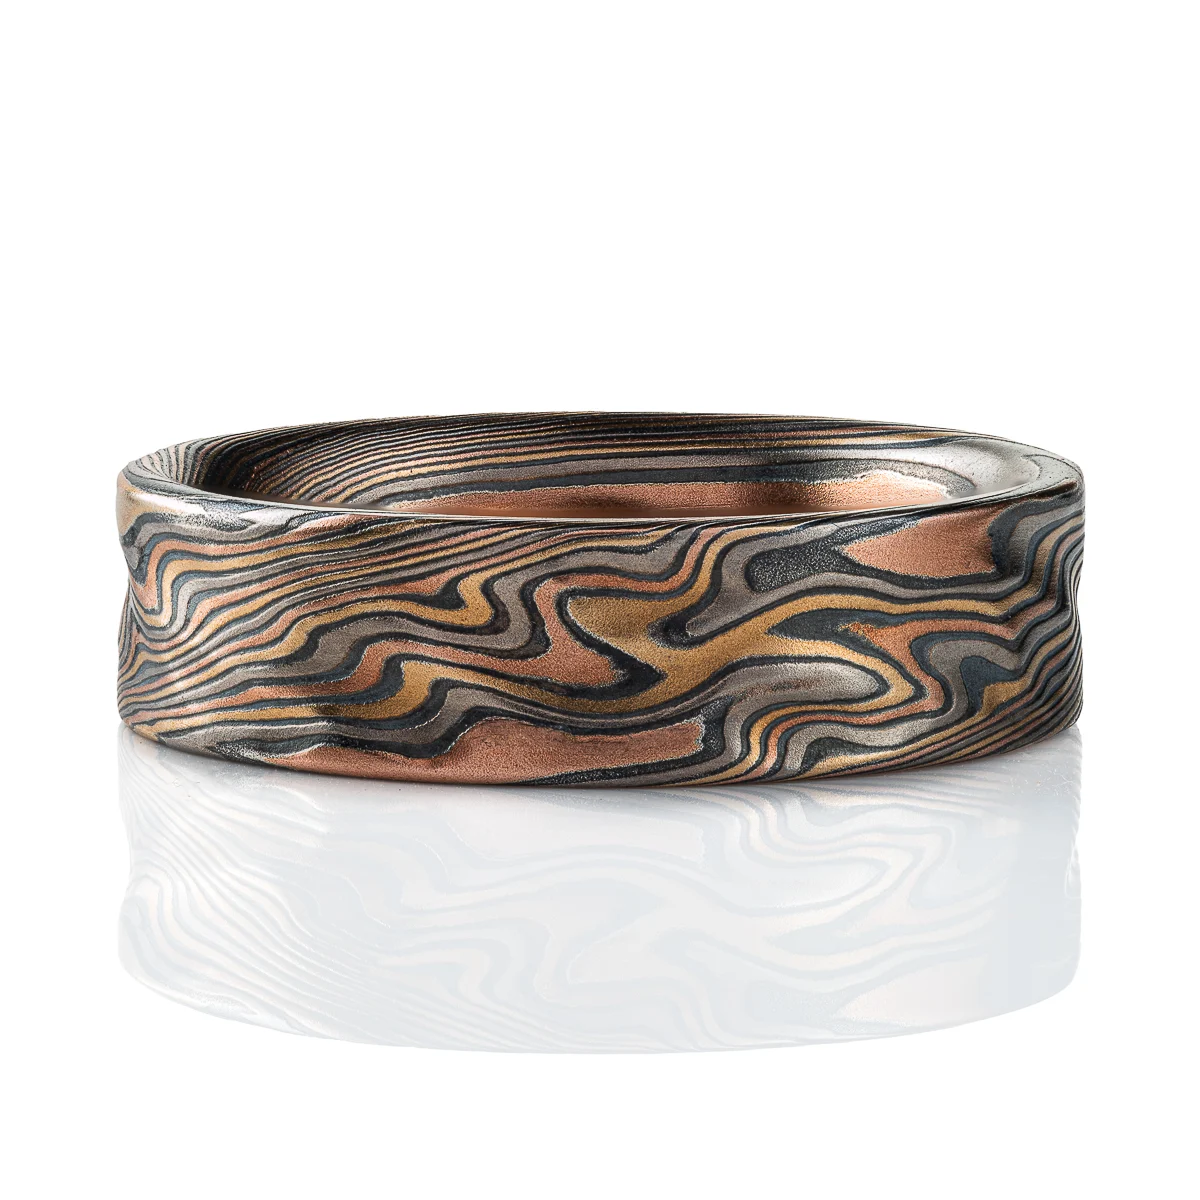 Twisting mokume gane pattern ring in multicolor palette with surface texture.